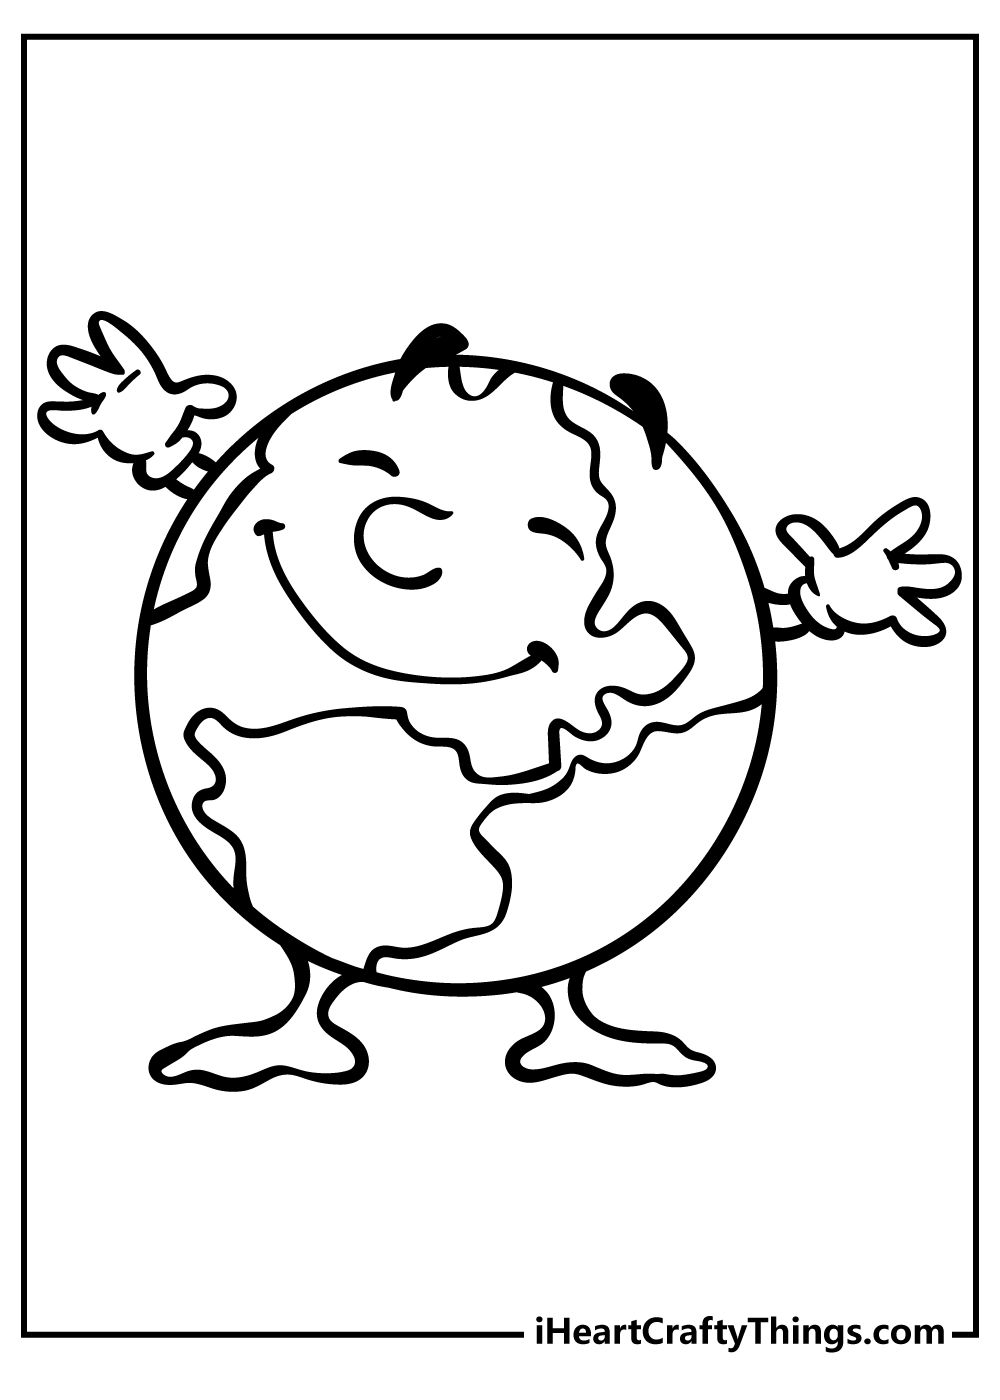 Earth Coloring Book for adults free download